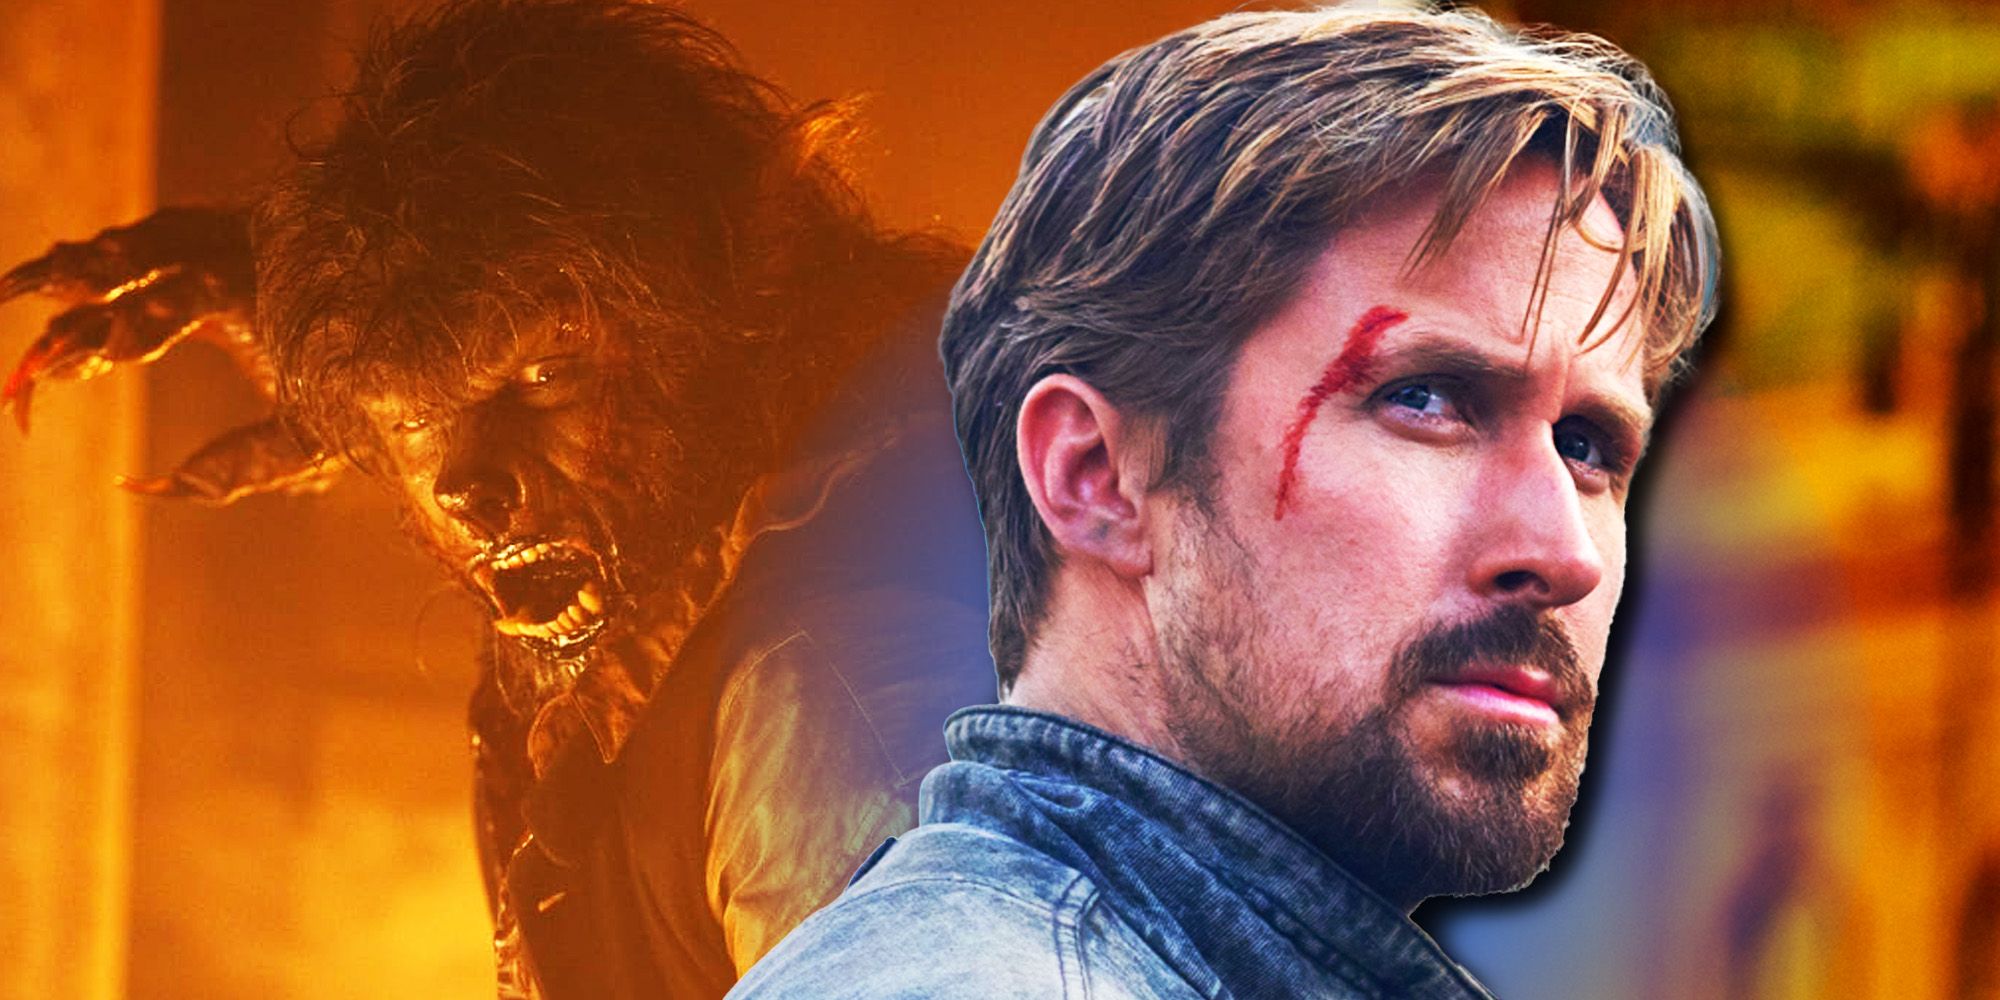 Collage of The Wolfman from the 2010 Universal movie and Ryan Gosling in a denim jacket with a cut on his face